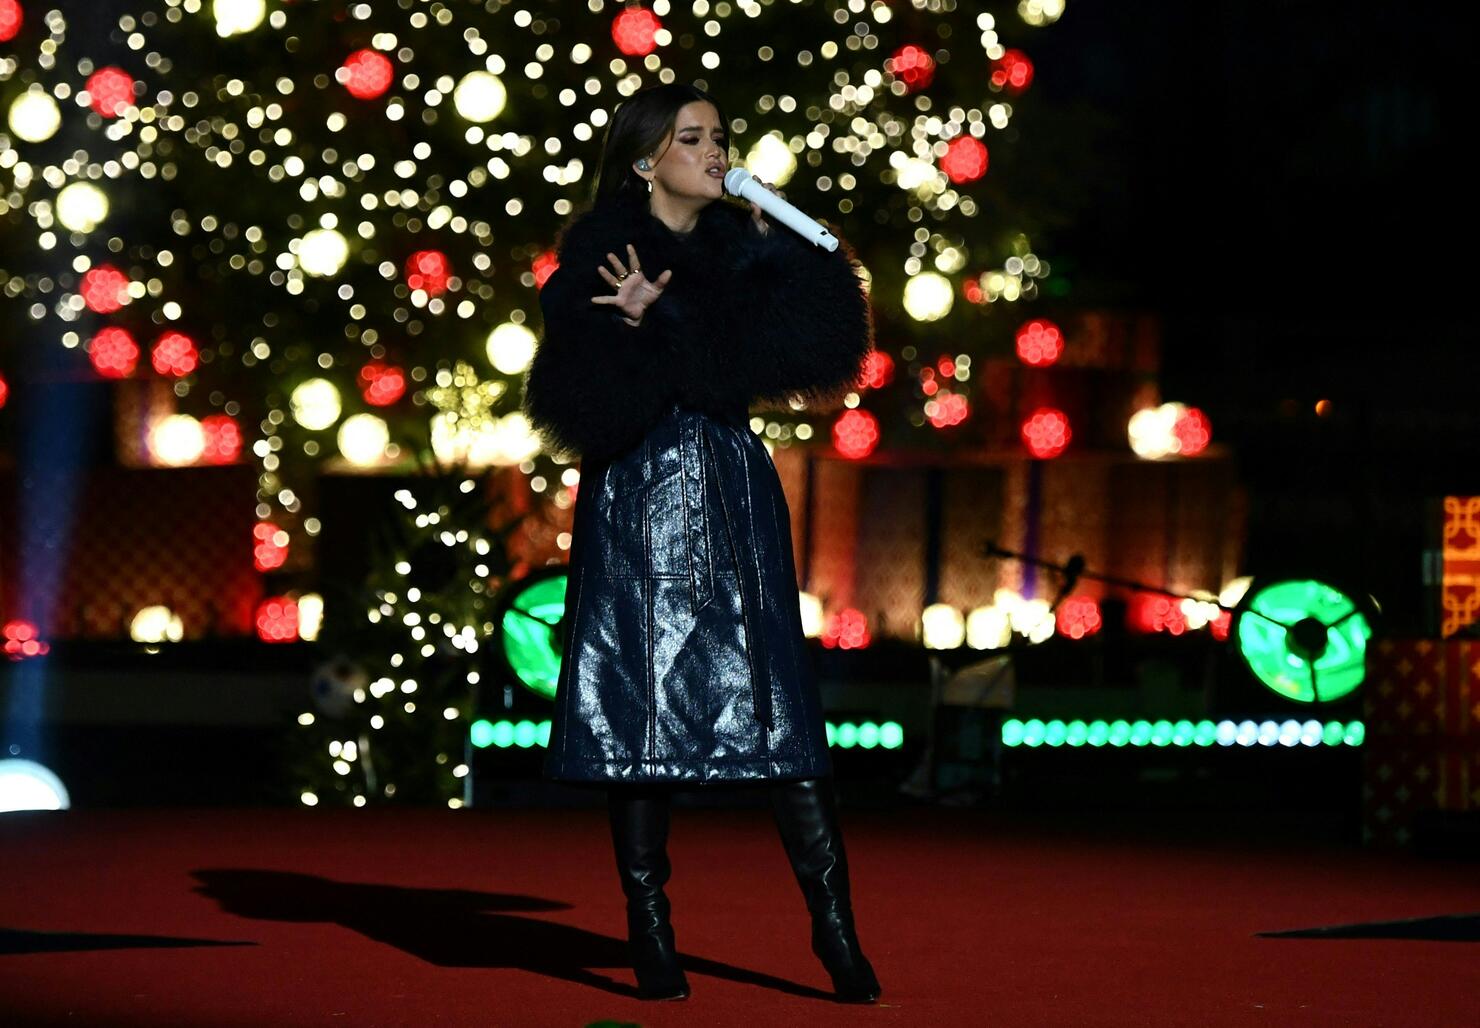 Maren Morris Performs Iconic Christmas Song At D.C. Tree Lighting ...